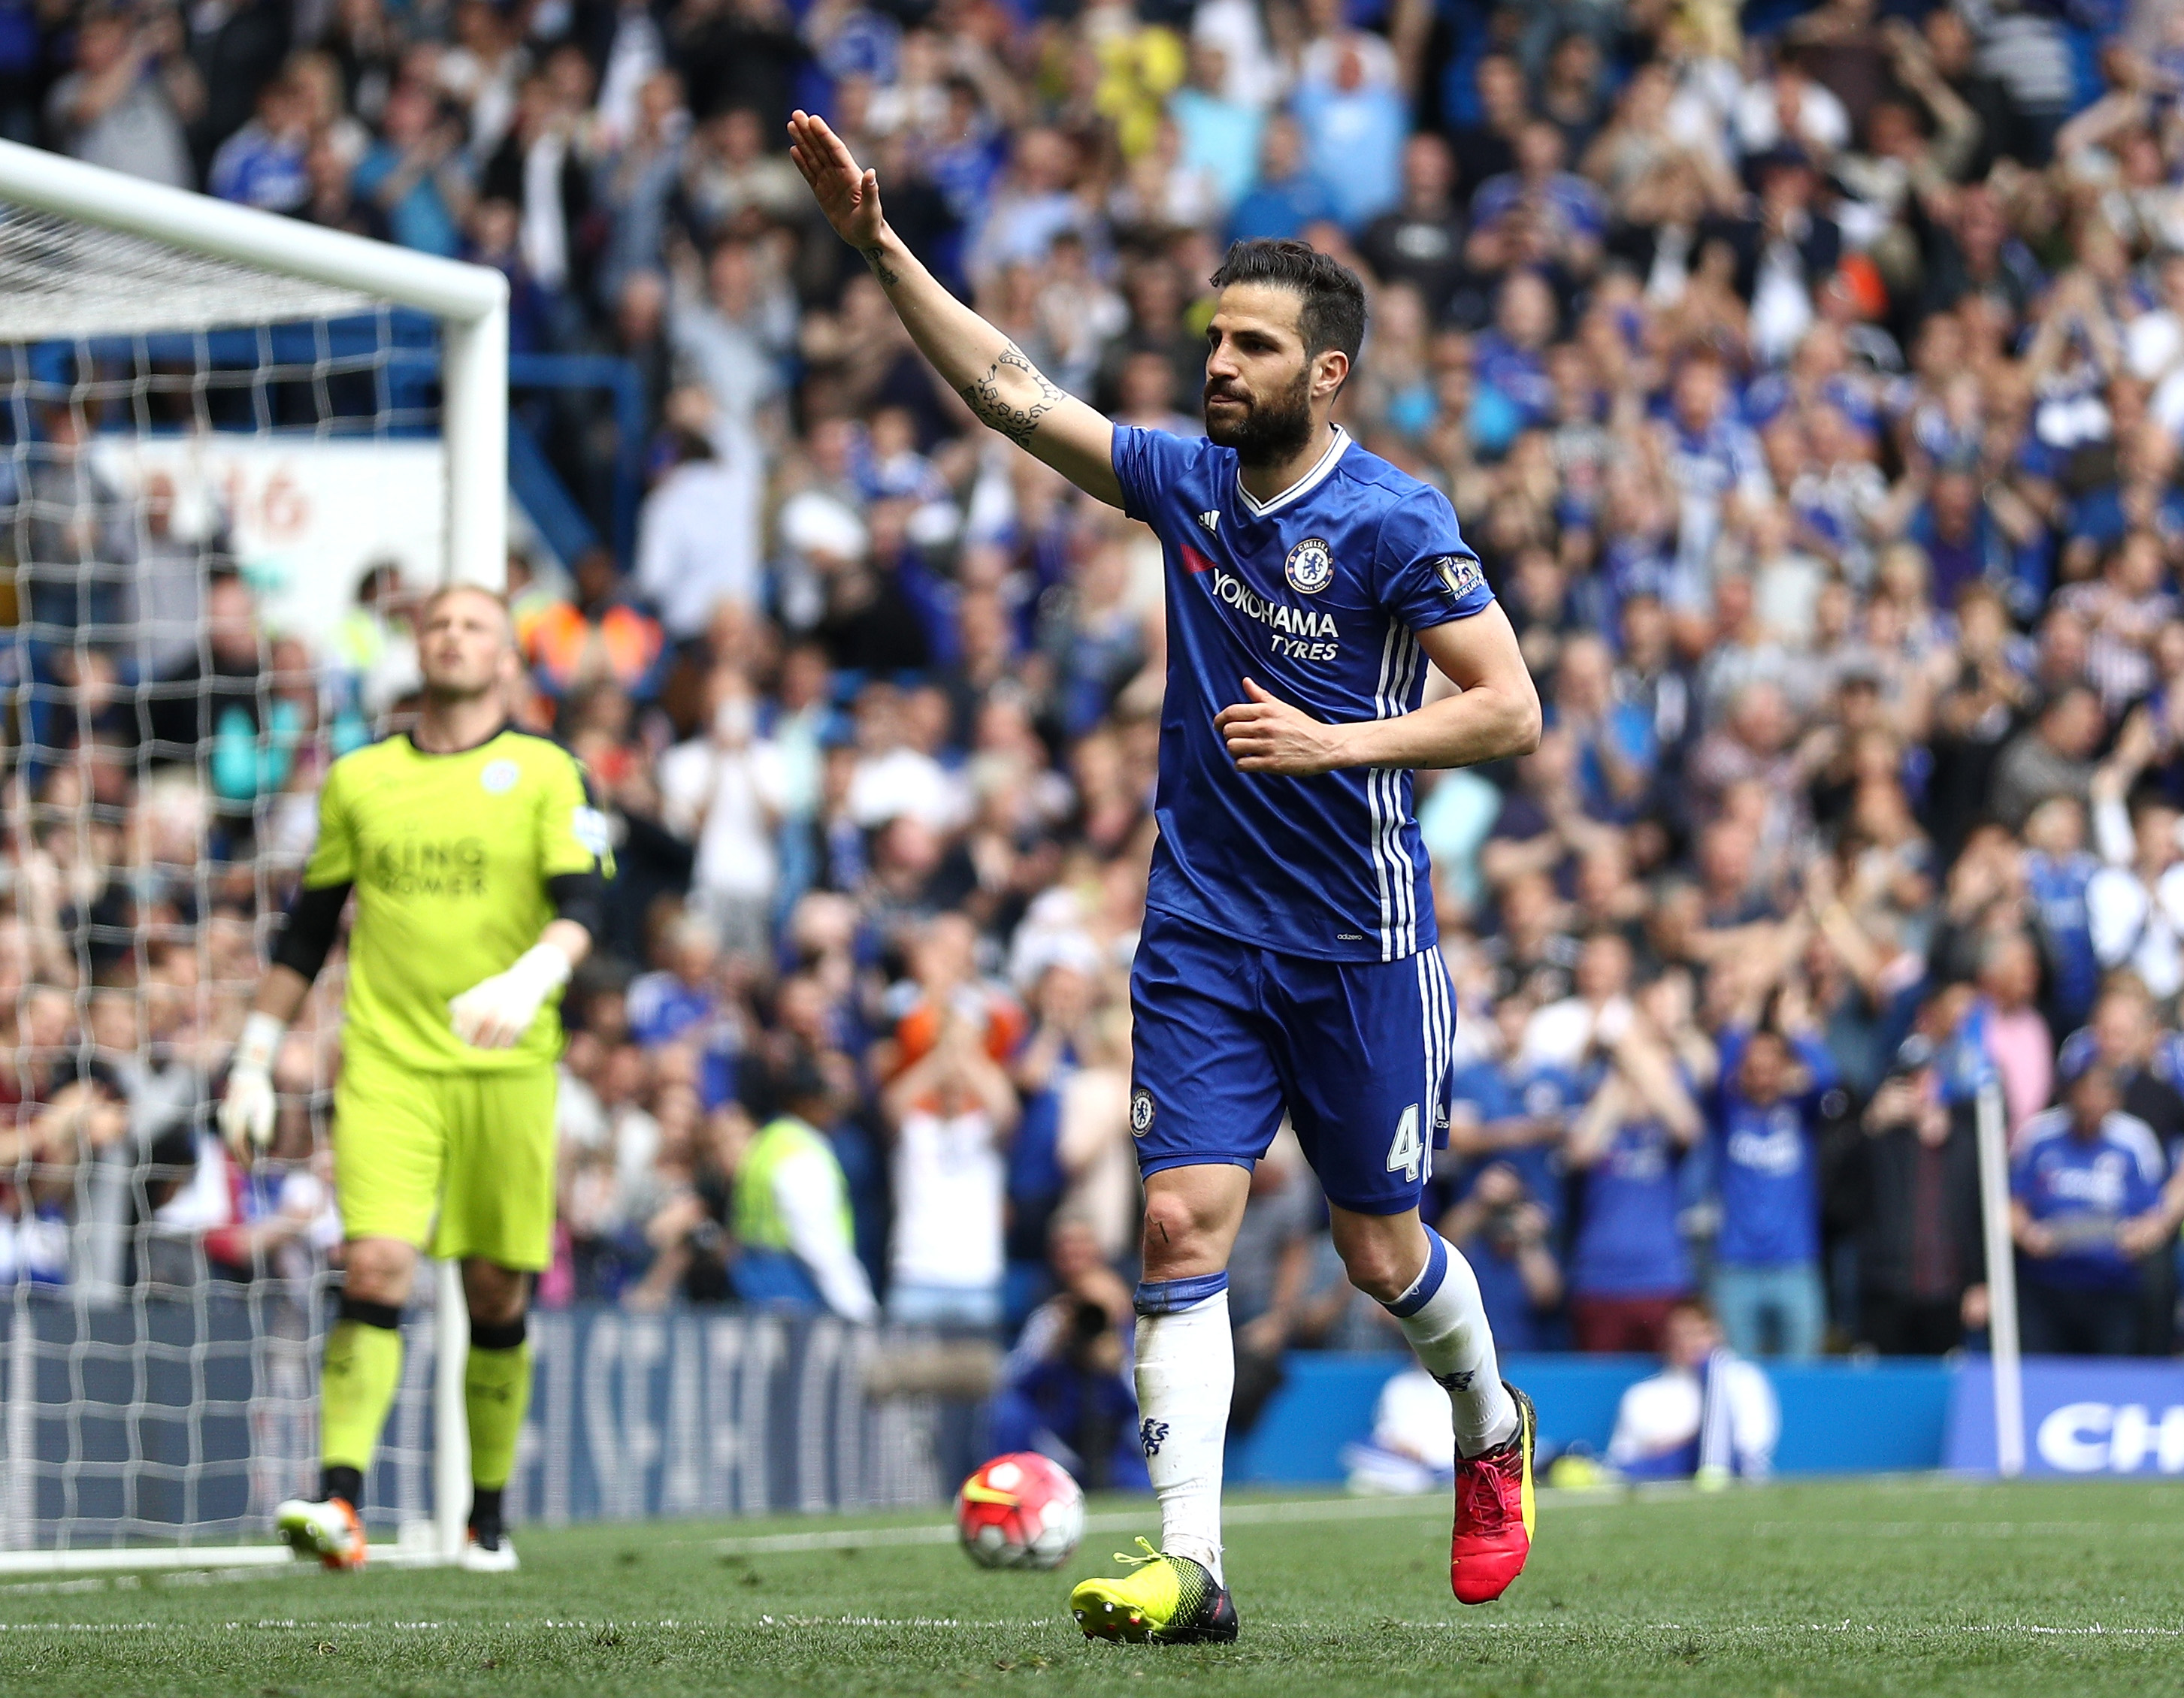 LONDON, ENGLAND - MAY 15: Sesc Fabregas of Chelsea celebrates scoring his team's first goal from the penalty spot during the Barclays Premier League match between Chelsea and Leicester City at Stamford Bridge on May 15, 2016 in London, England. (Photo by Paul Gilham/Getty Images)